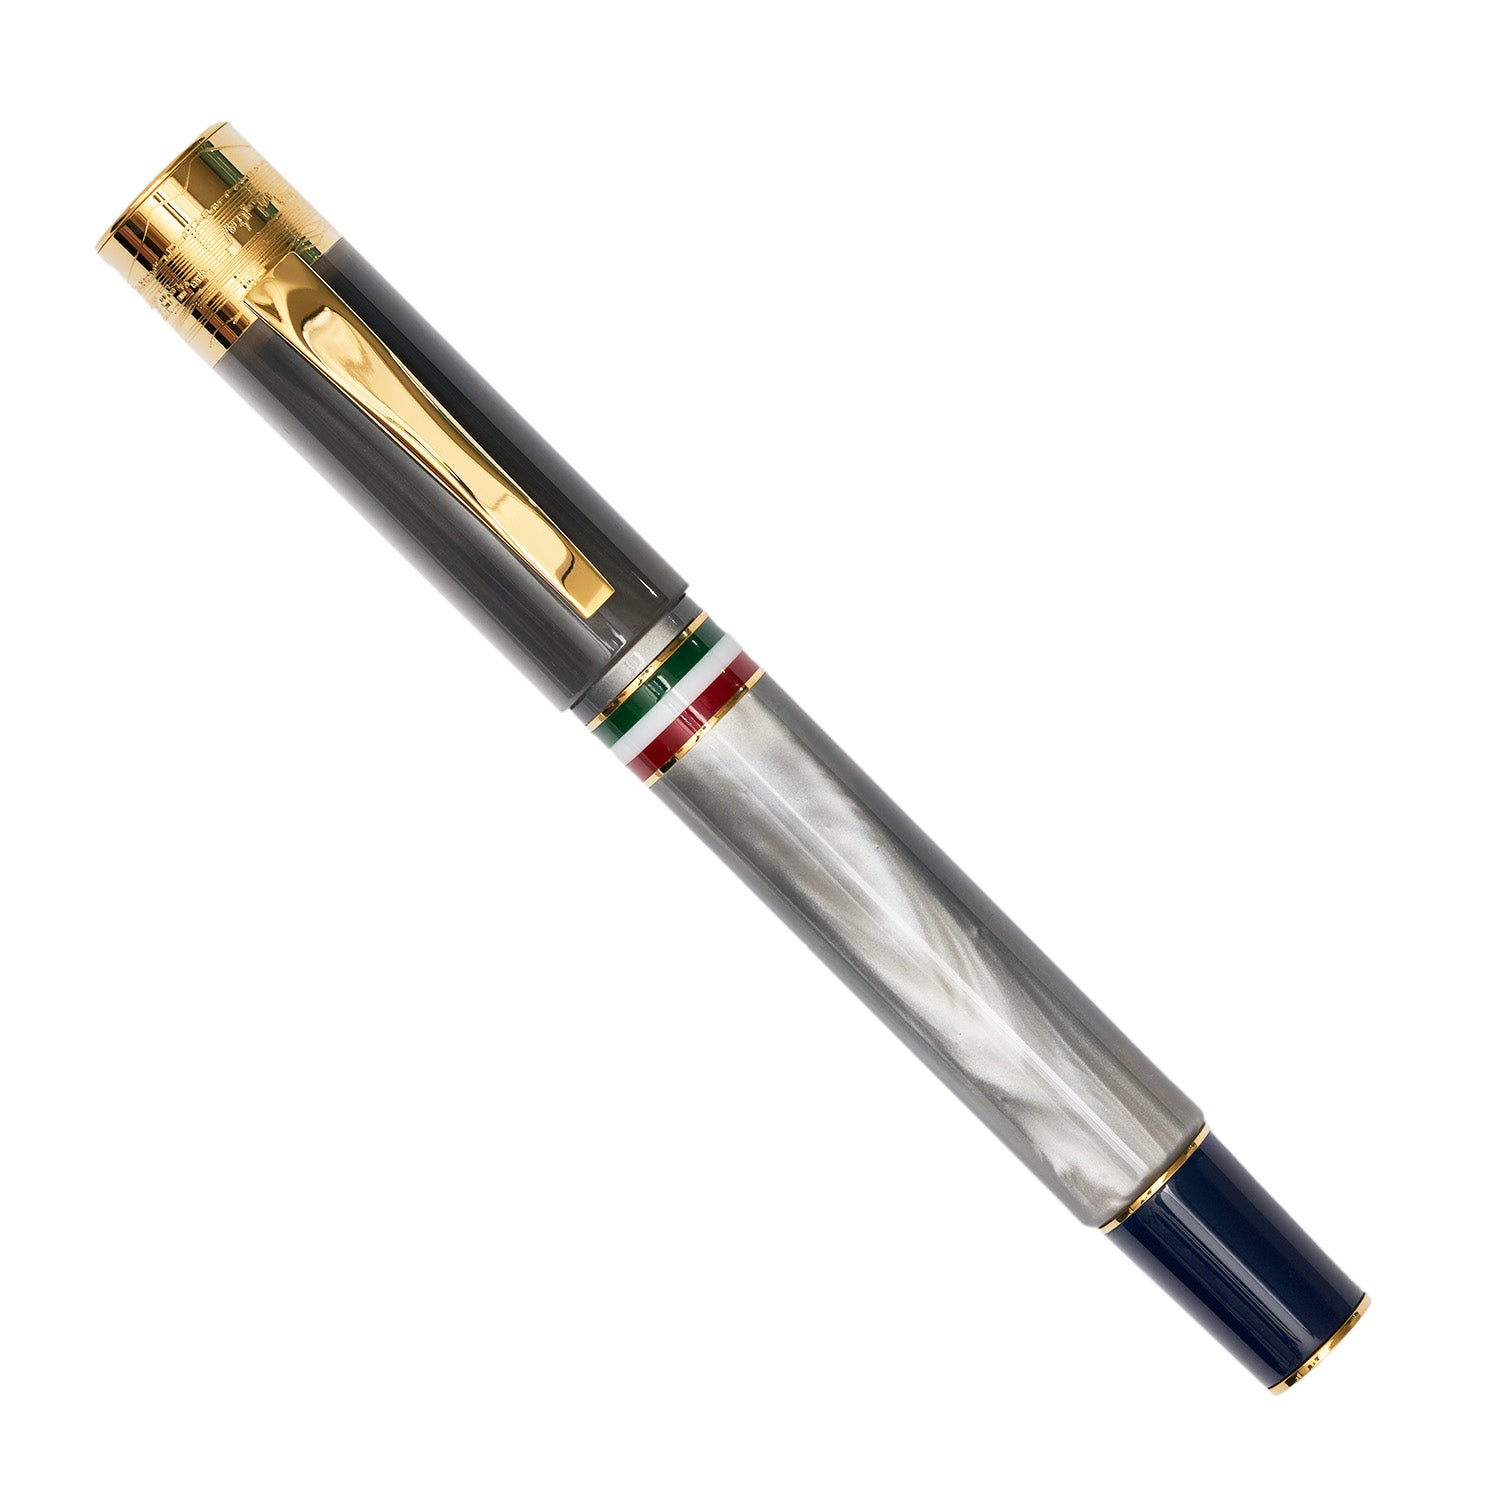 Gioia Partenope Fountain Pen + Rollerball - Madreperla - Gold Trim Made in Italy capped